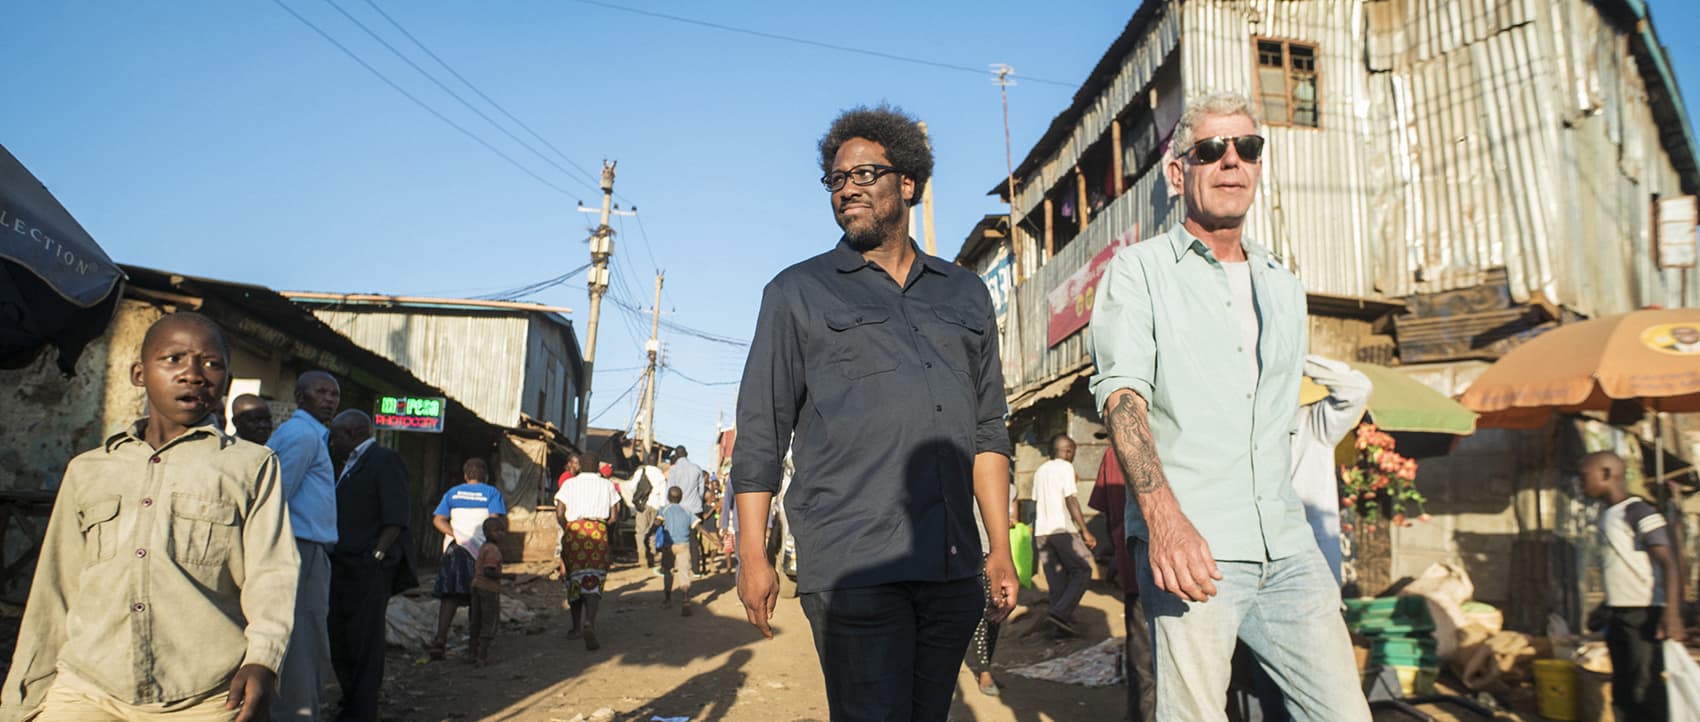 Anthony Bourdain (right) with W. Kamau Bell in the Kibera slums in Nairobi, Kenya, while filming the first episode of the final season of CNN's &quot;Parts Unknown.&quot; (Courtesy David Scott Holloway via CNN)